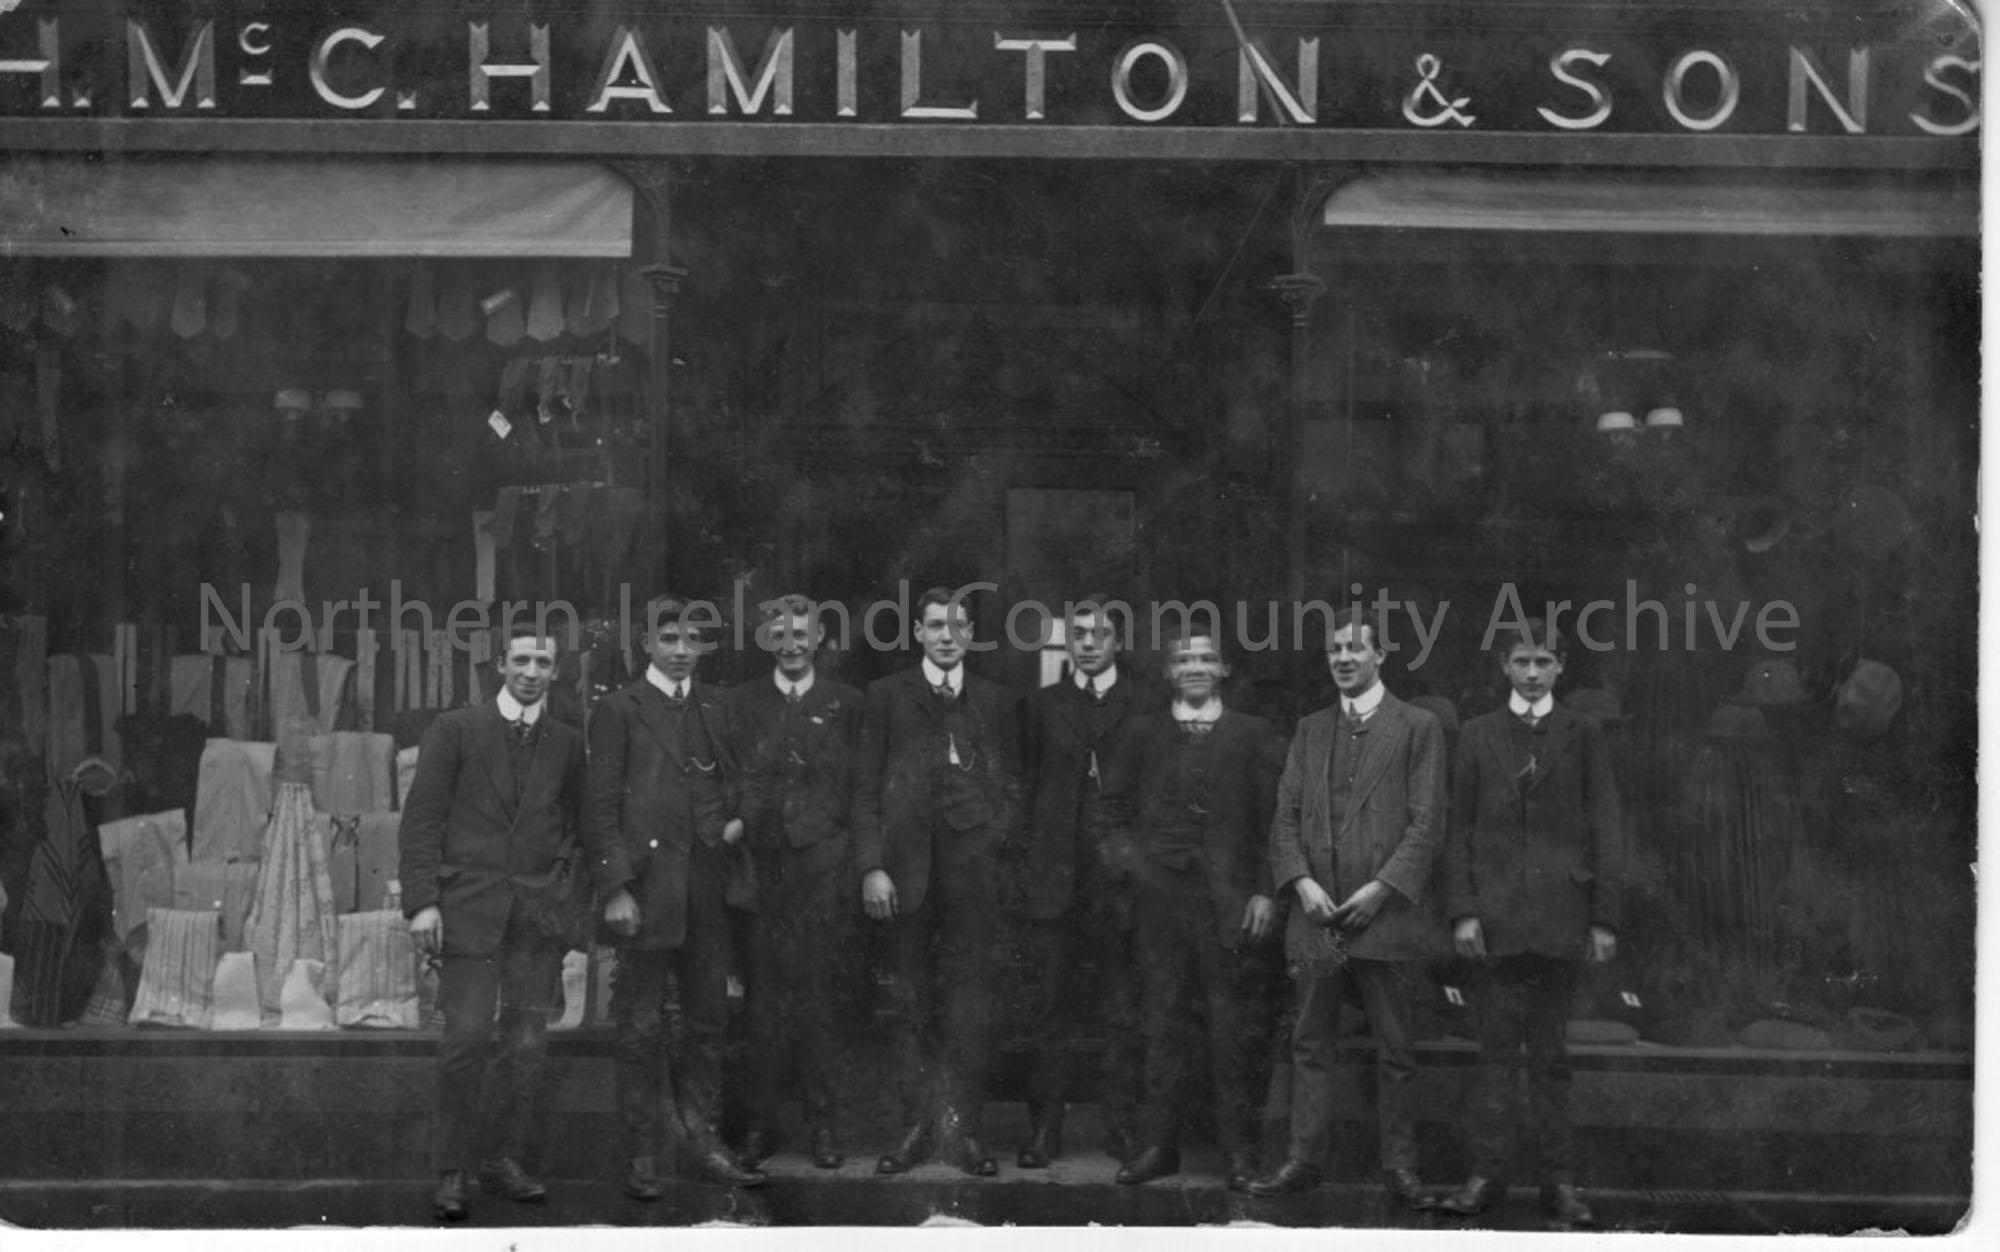 Eight young men stand outside Hamilton McCurdy Hamilton and Sons’ store on Church street, Ballymoney